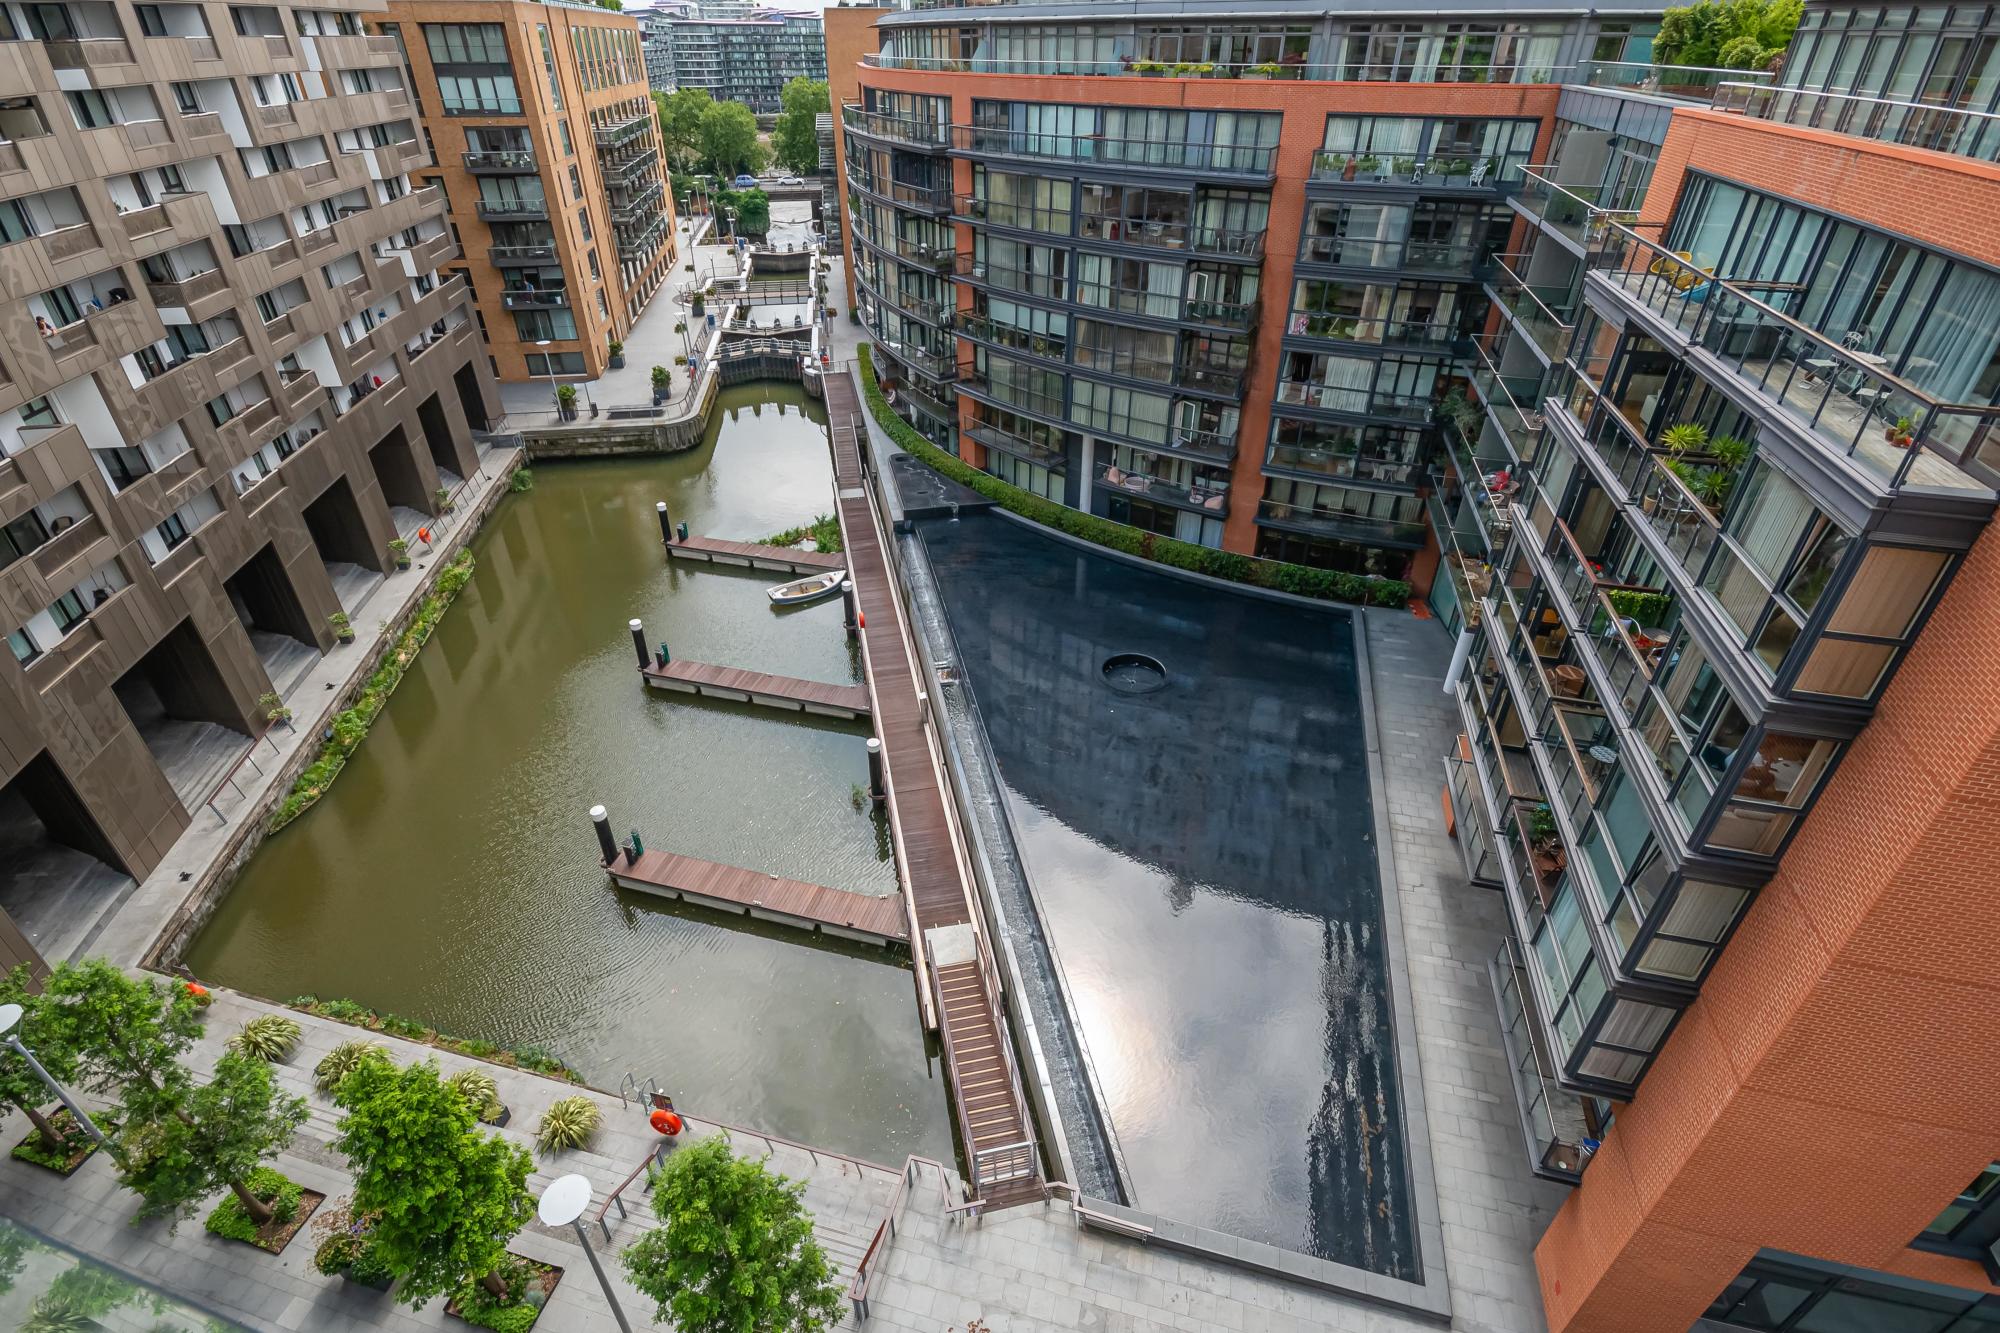 Q3 Wins Maintenance Contract With Grosvenor Waterside in Chelsea